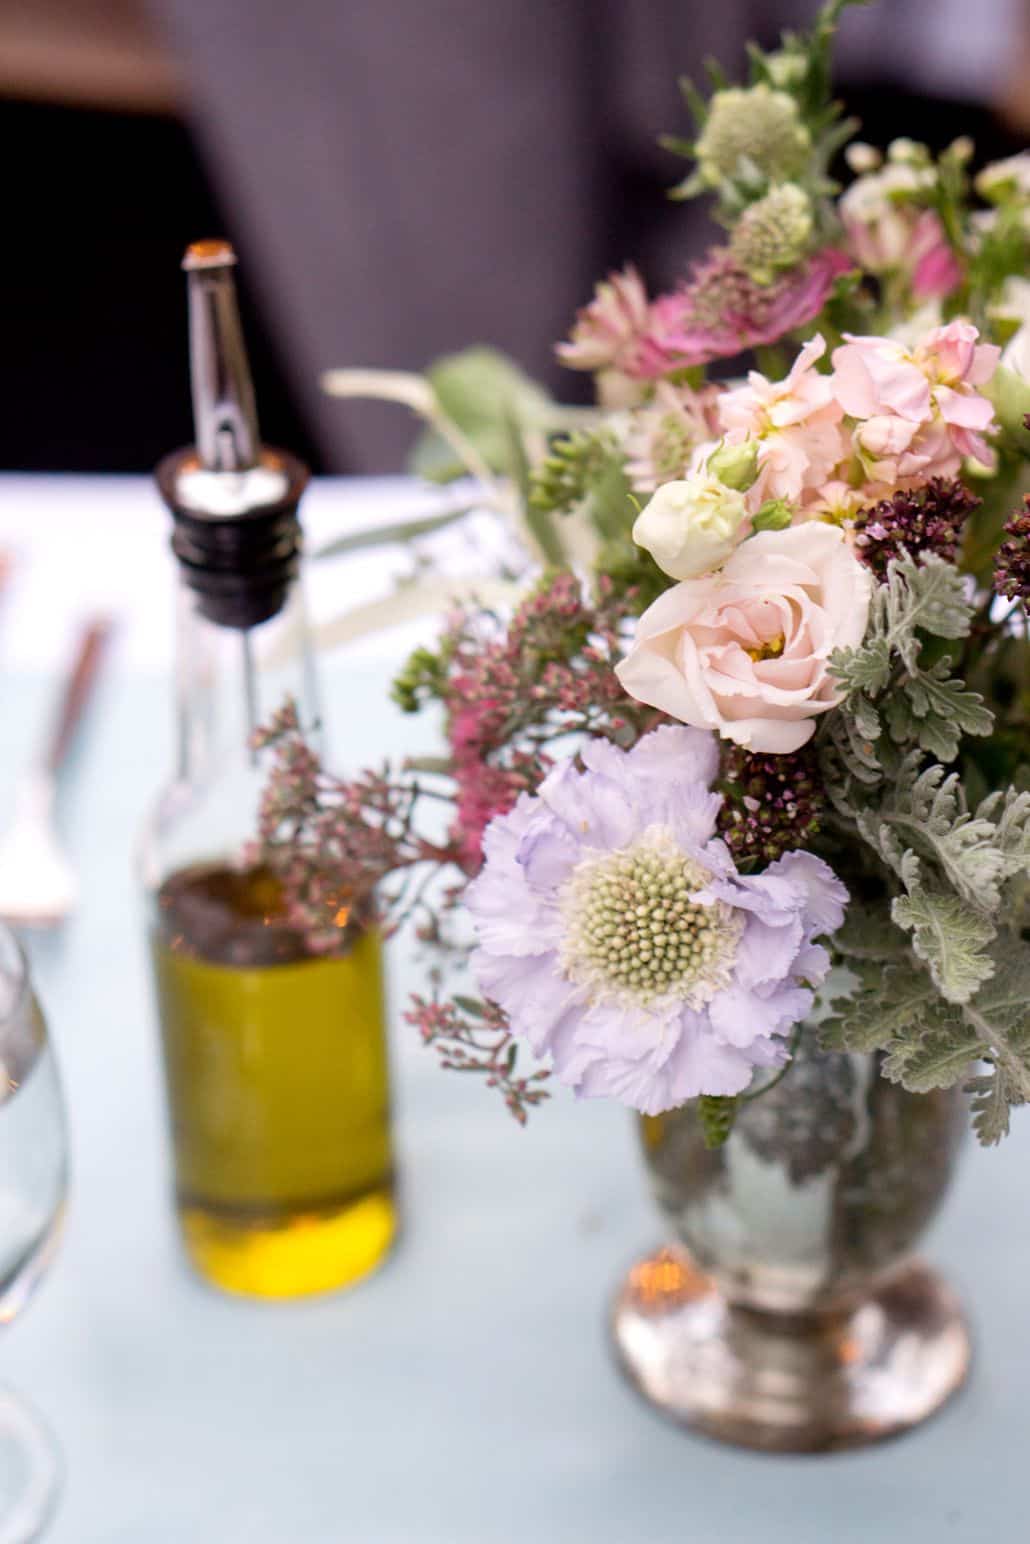 wedding table centerpiece next to bottle of olive oil, vintage colors, white, pink, dusty rose, silver leaves in a silver vase, Opalia florist, Frankie's 457 Spuntino, Brooklyn, NY wedding photographer.